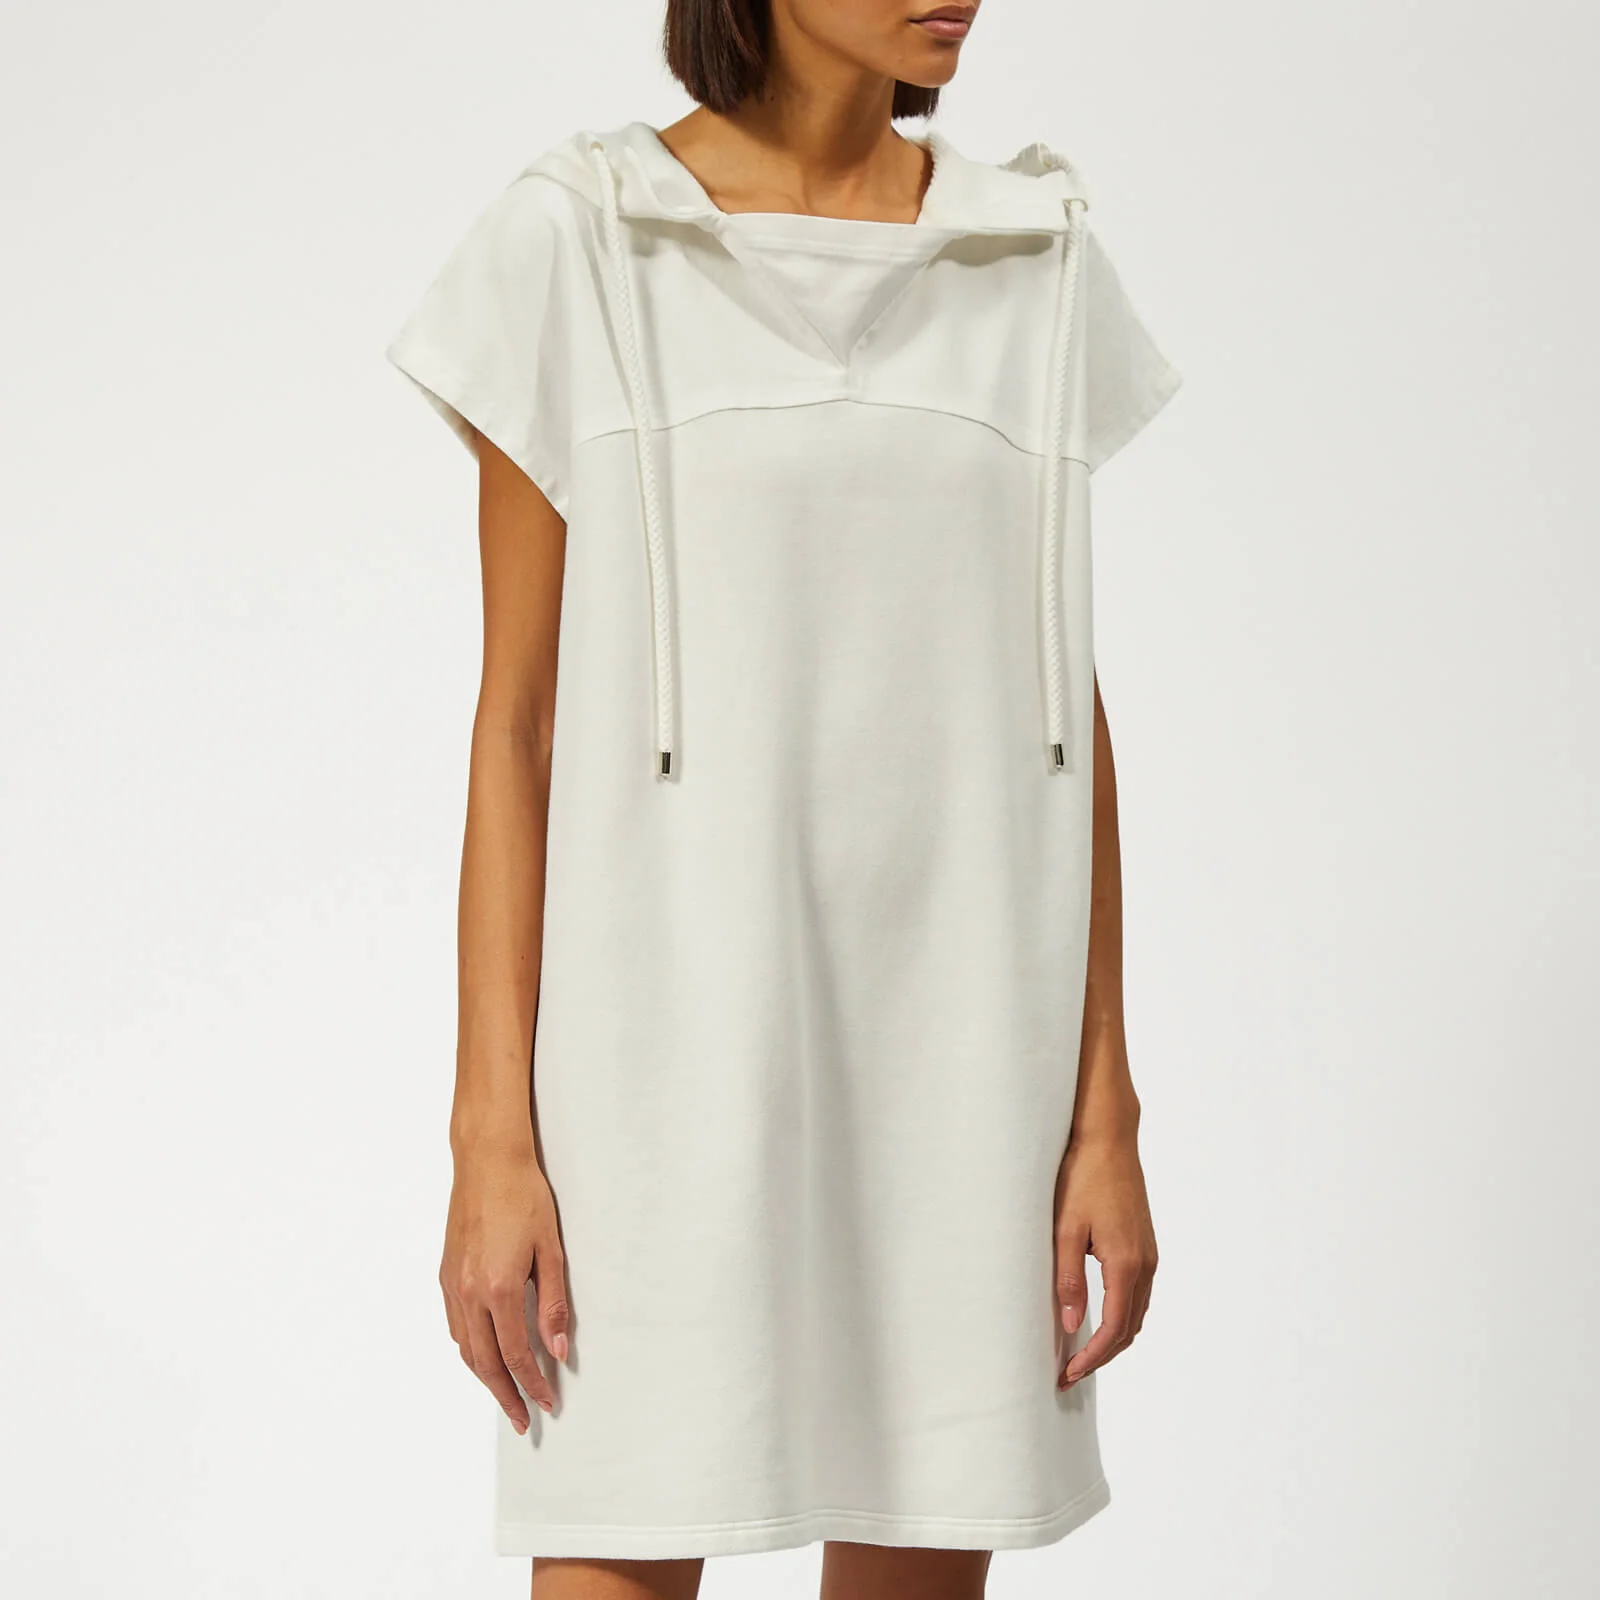 See By Chloé Women's Hooded Dress - Crystal White Image 1